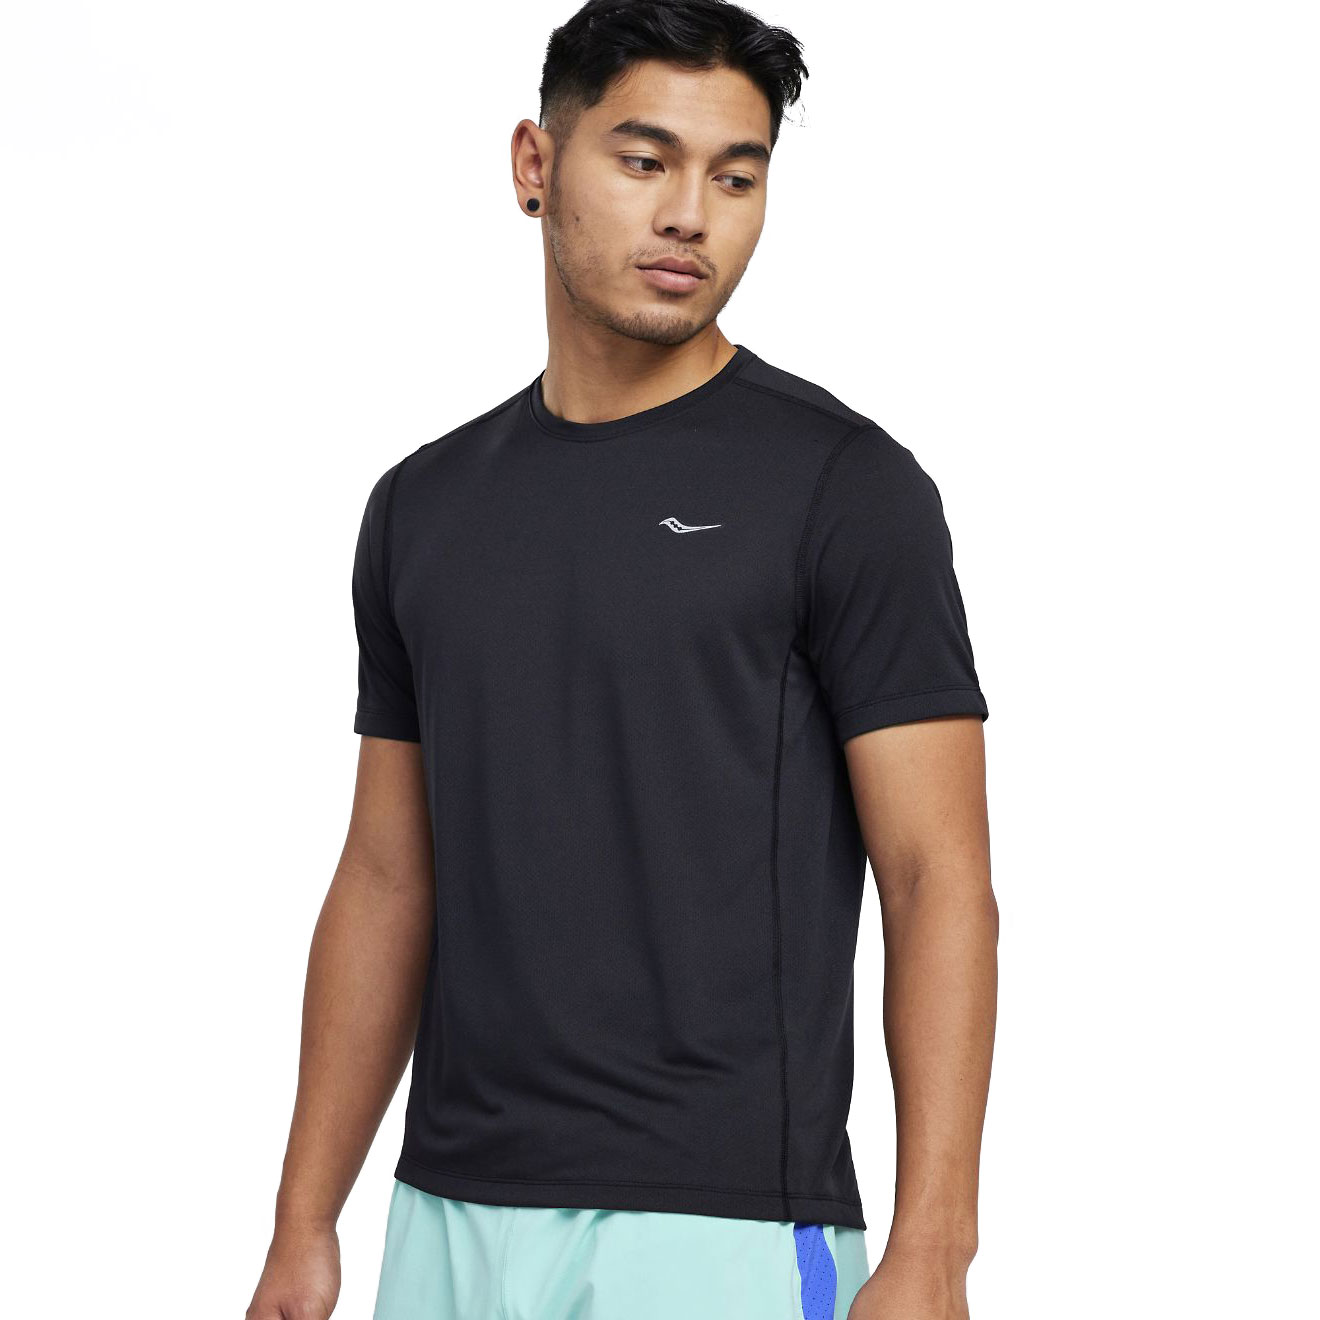 Picture of Saucony Stopwatch Short Sleeve Shirt - black